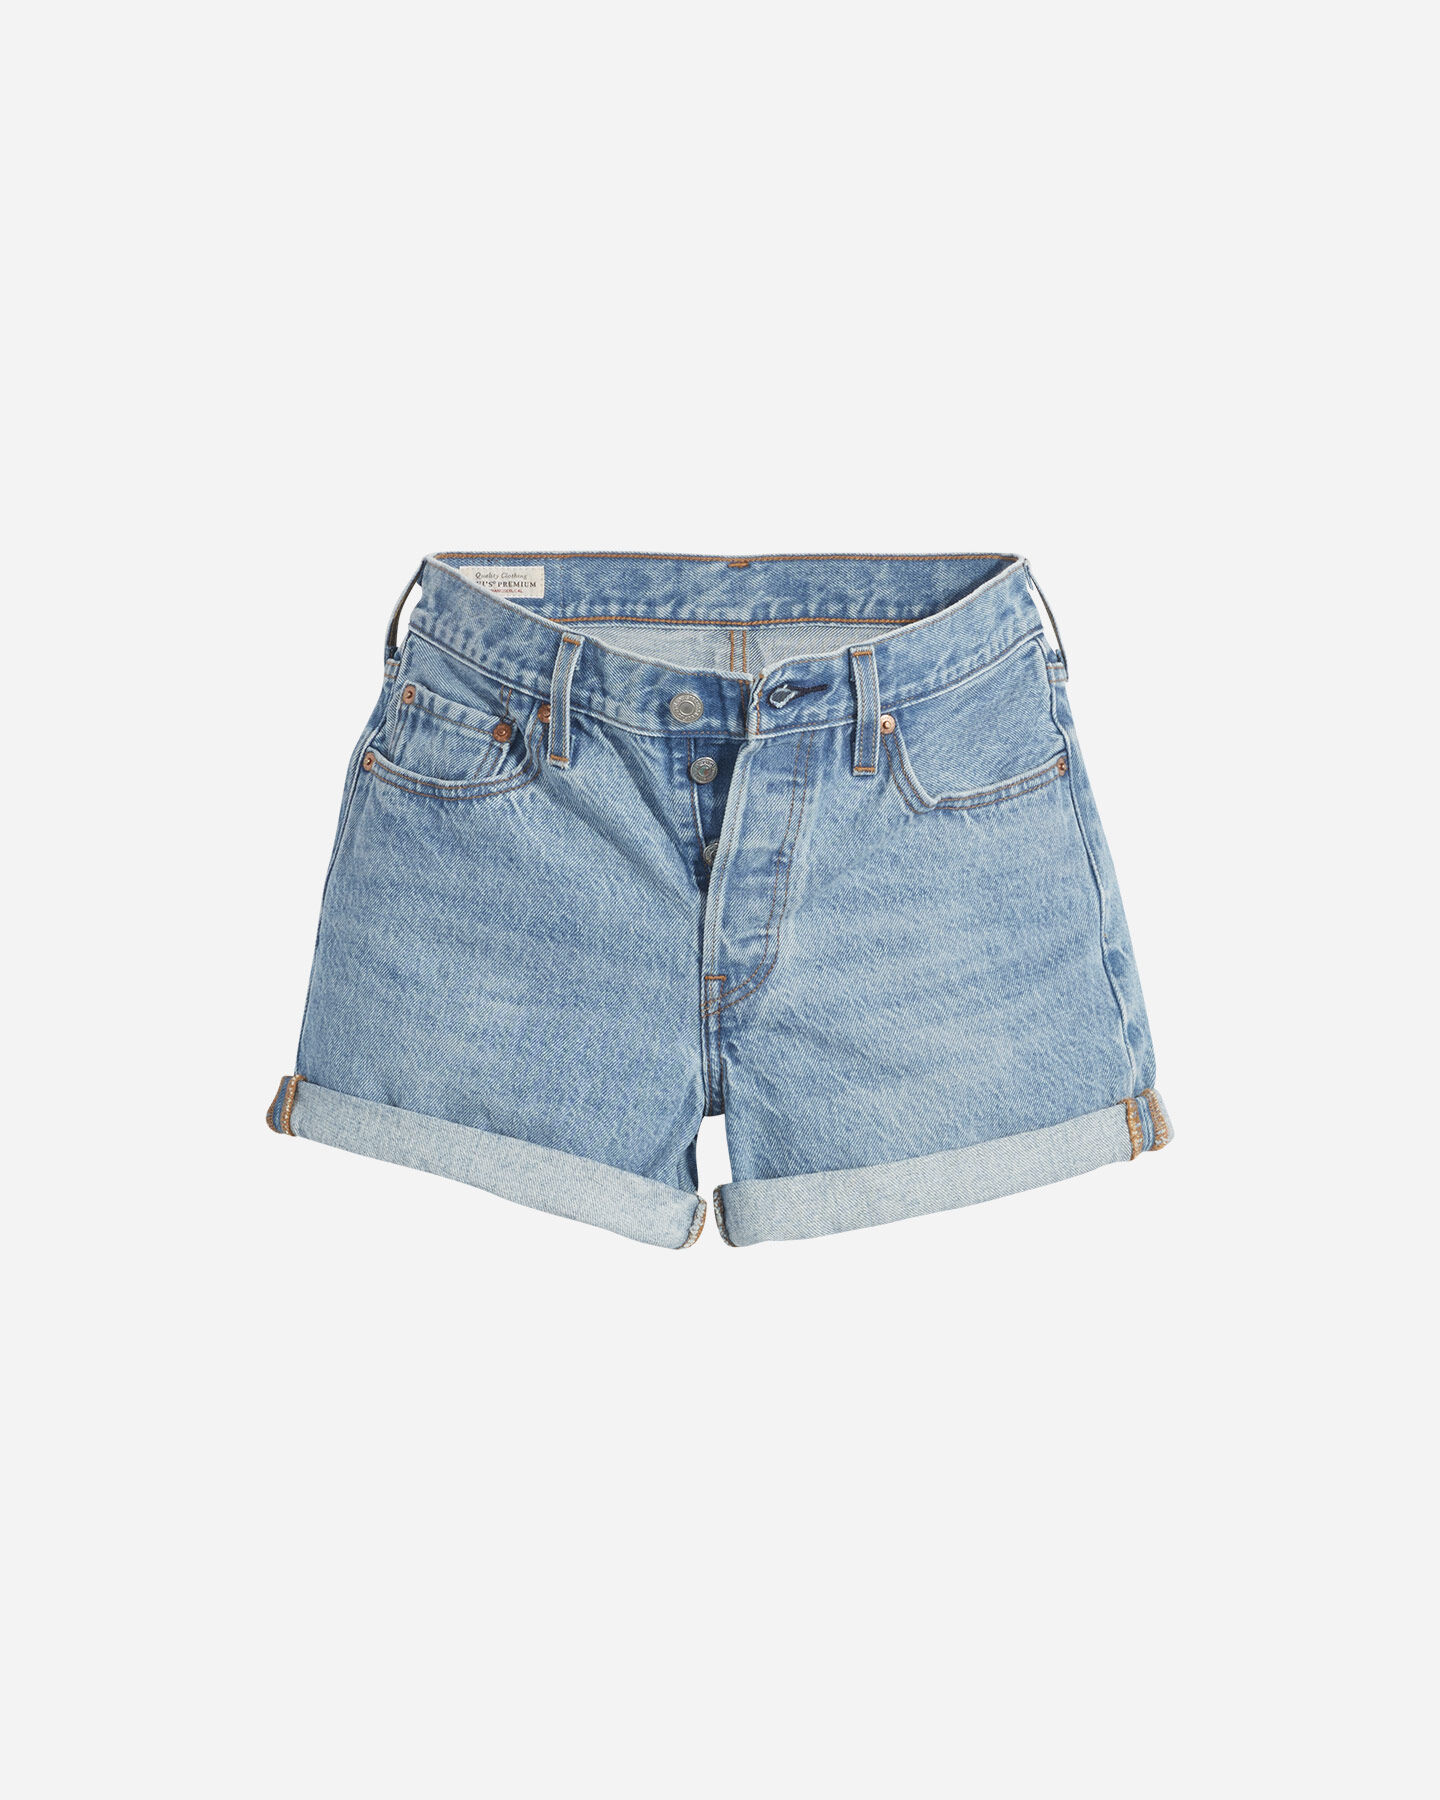  Jeans LEVI'S 501 ROLLED SHORT DENIM W S4104866|0032|29 scatto 0